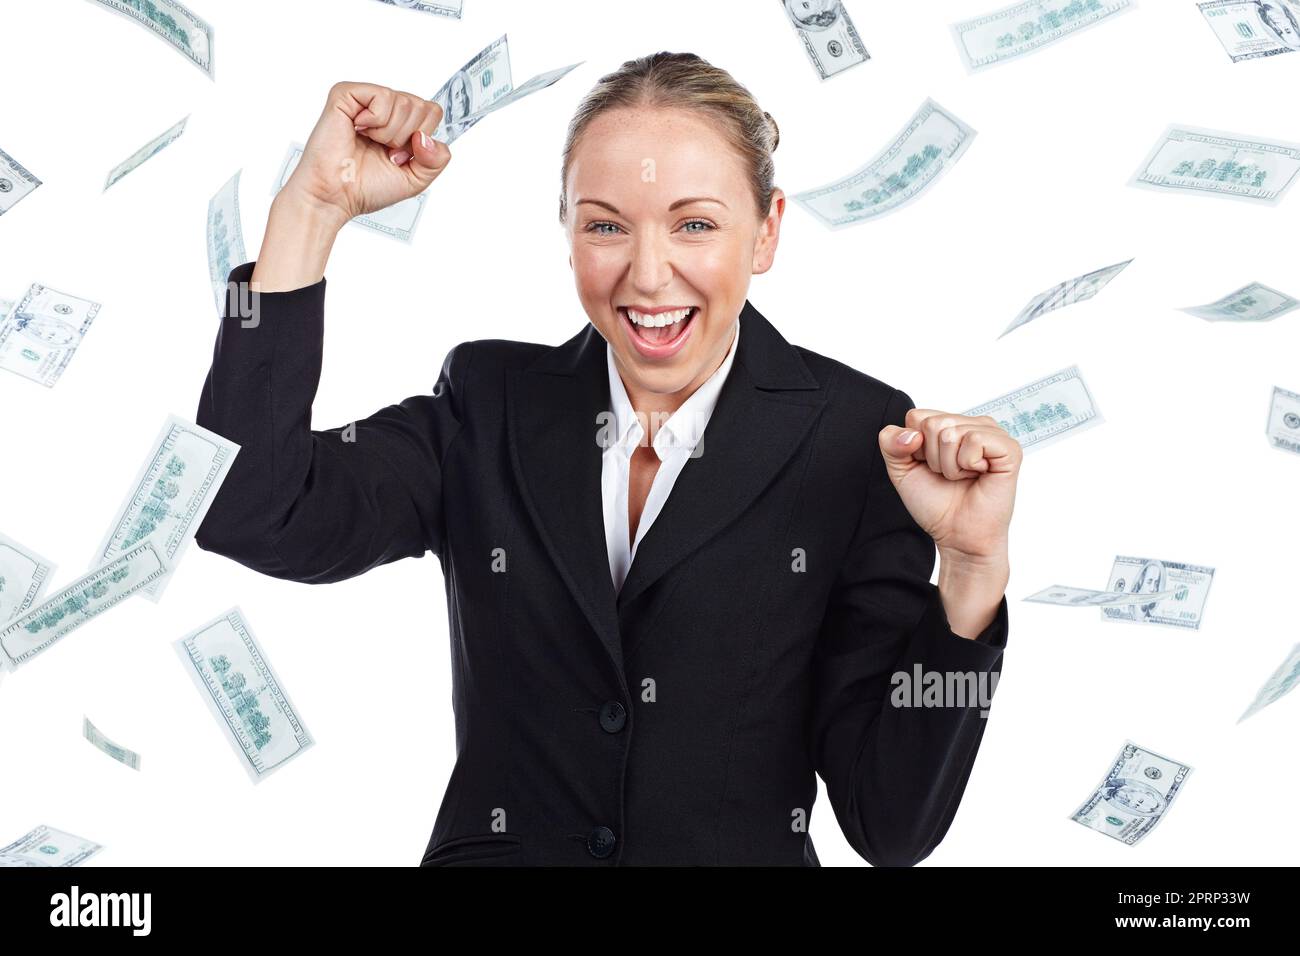 Its all about the money. Cropped portrait of a businesswoman cheering as money rains down against a white background. Stock Photo